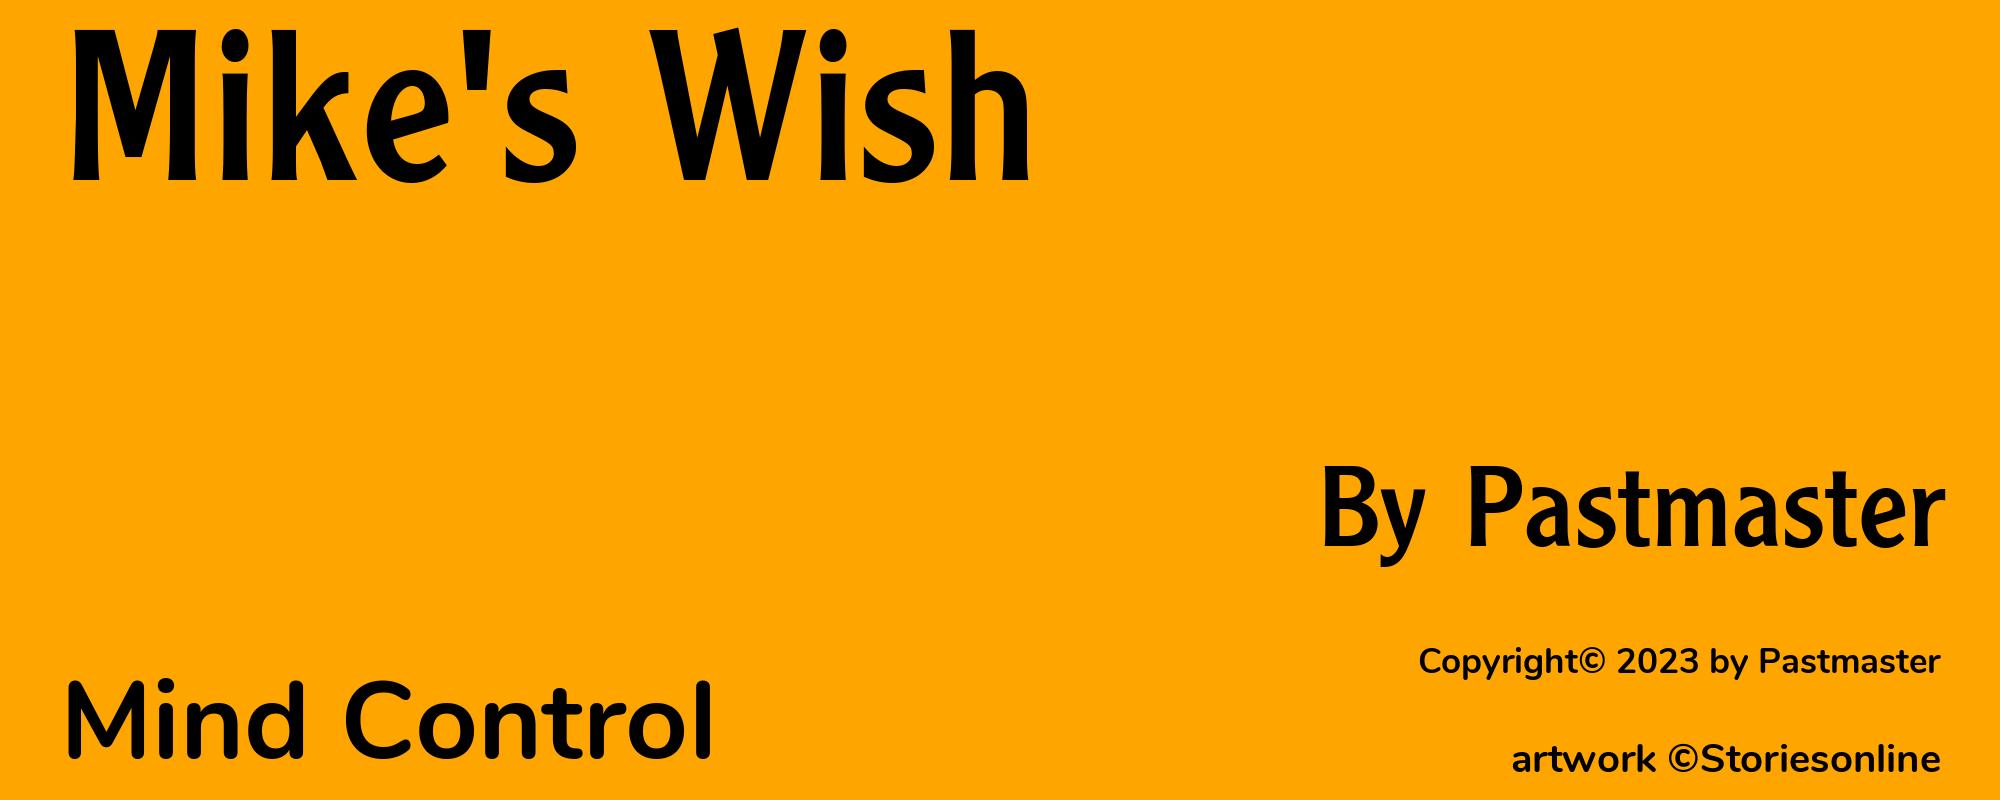 Mike's Wish - Cover